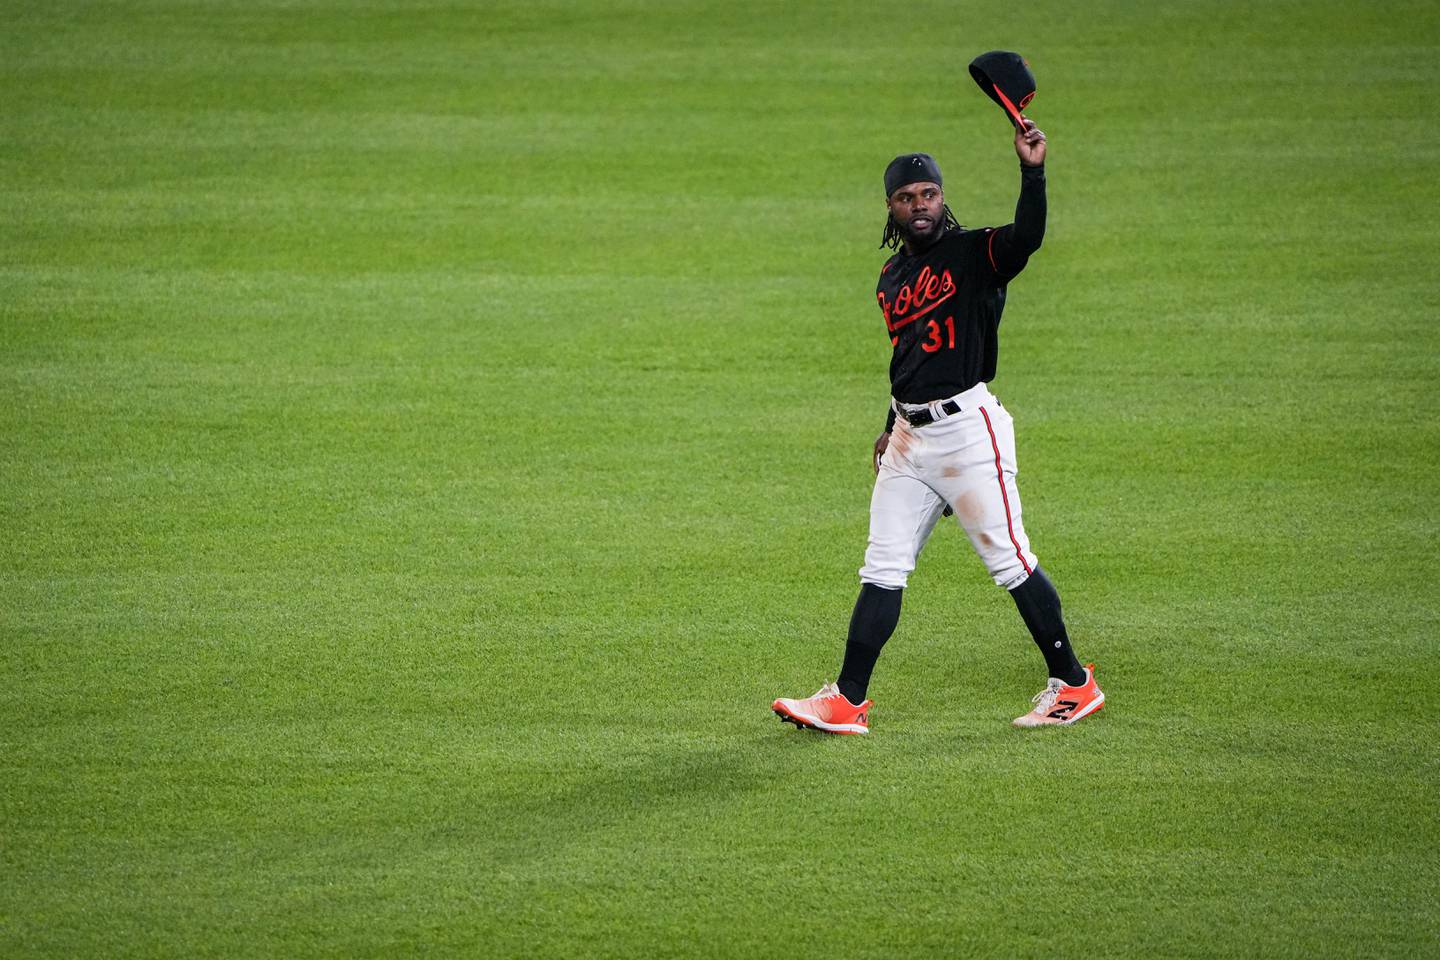 Baltimore Orioles center fielder Cedric Mullins tips his hat to the audience after successfully hitting for the cycle in a game against the Pittsburgh Pirates at Camden Yards on Friday, May 12. The Orioles won the first game of the 3-game series, 6-3.